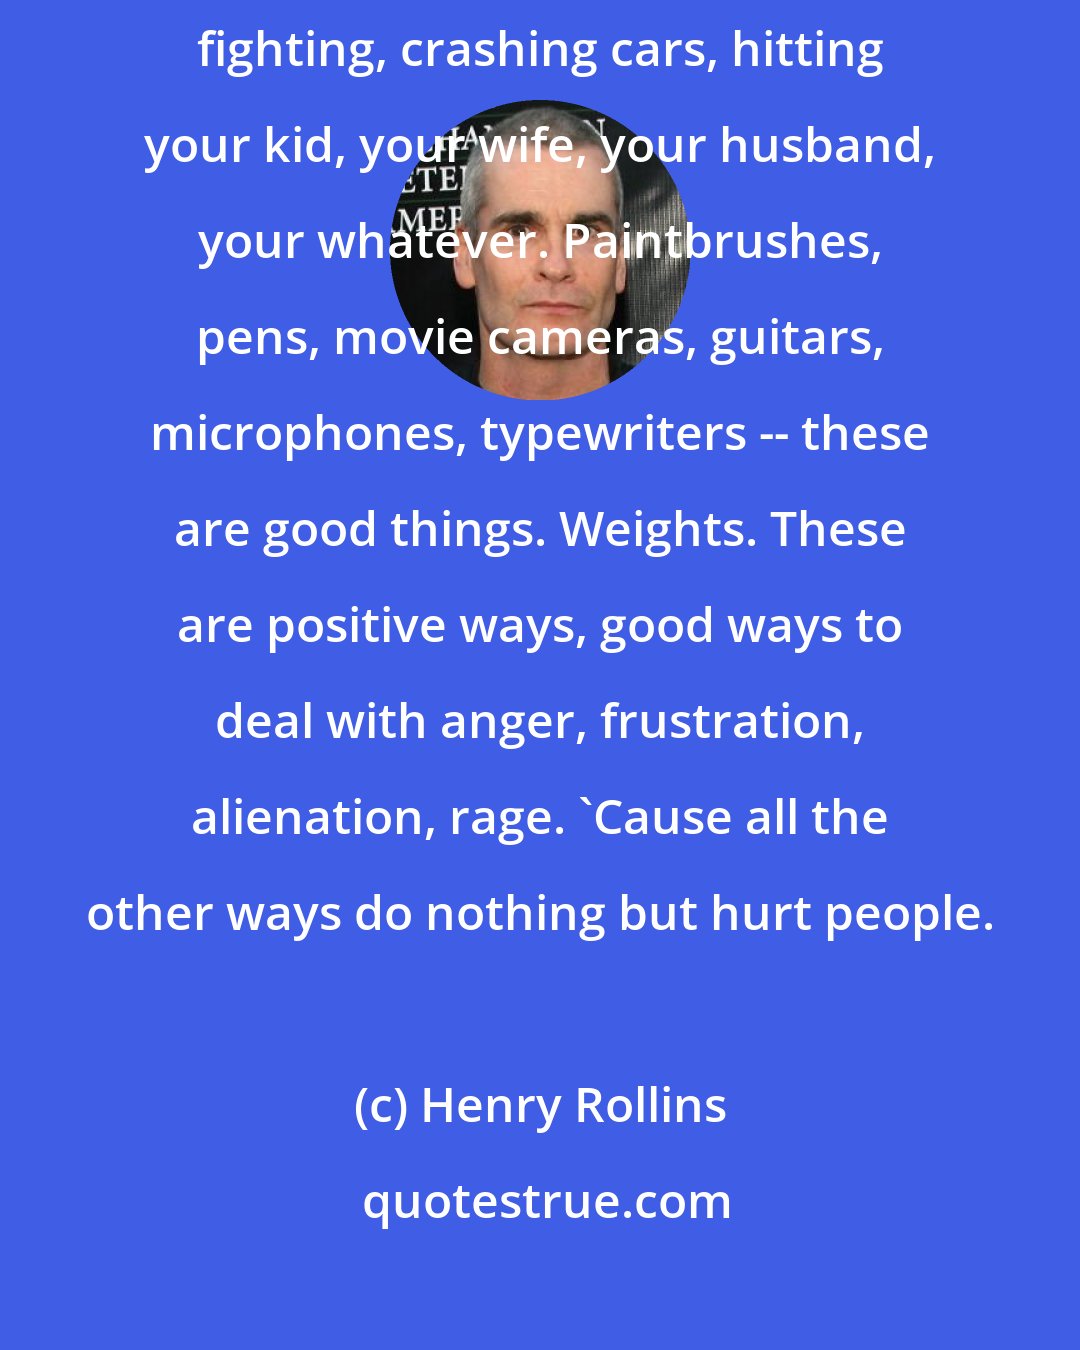 Henry Rollins: It's good to be able to deal with it [anger] somehow other than drinking, fighting, crashing cars, hitting your kid, your wife, your husband, your whatever. Paintbrushes, pens, movie cameras, guitars, microphones, typewriters -- these are good things. Weights. These are positive ways, good ways to deal with anger, frustration, alienation, rage. 'Cause all the other ways do nothing but hurt people.